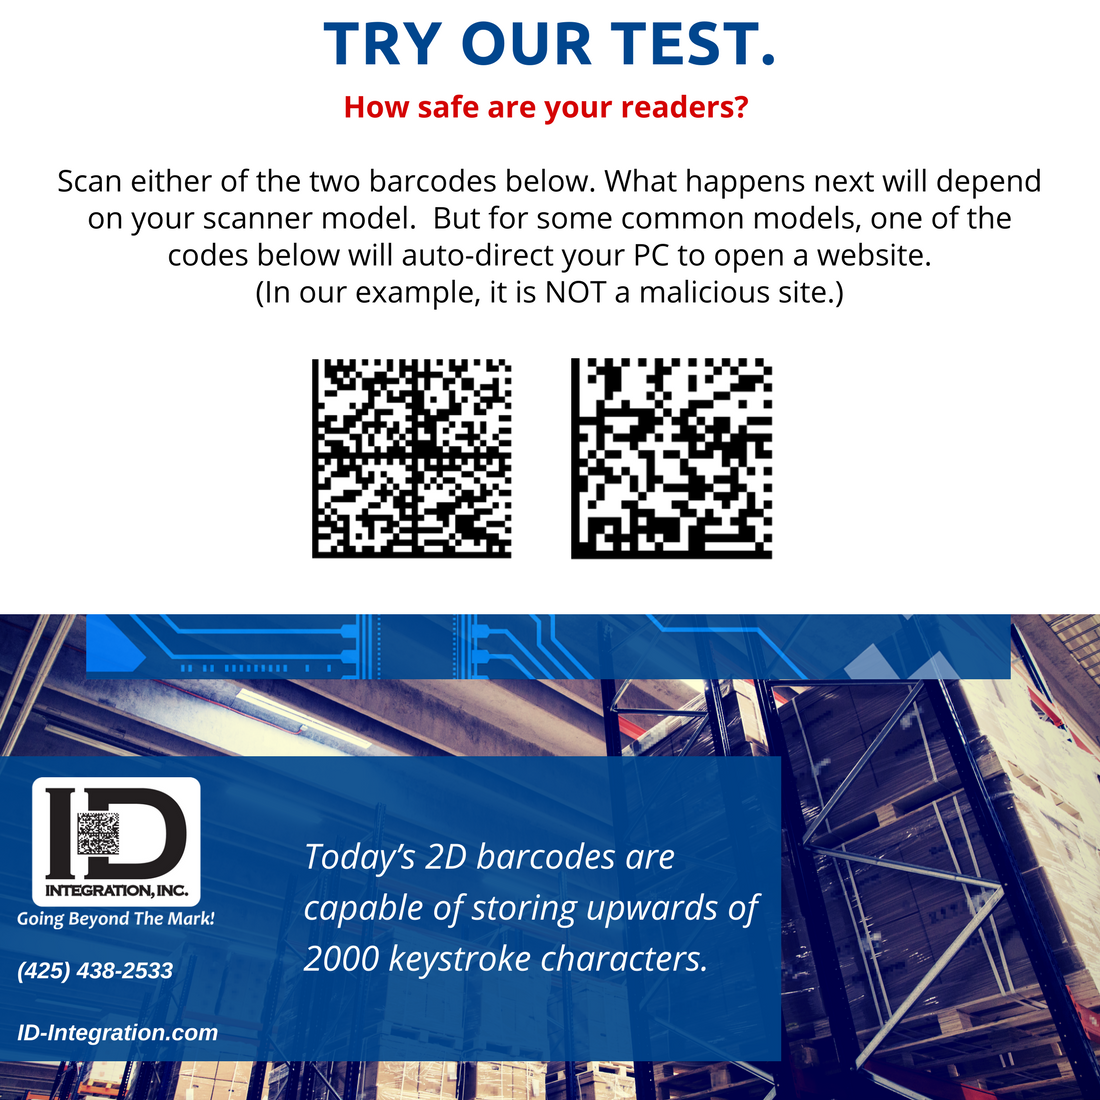 shows two test 2d data matrix barcodes to test scanner security from today's barcode security threat